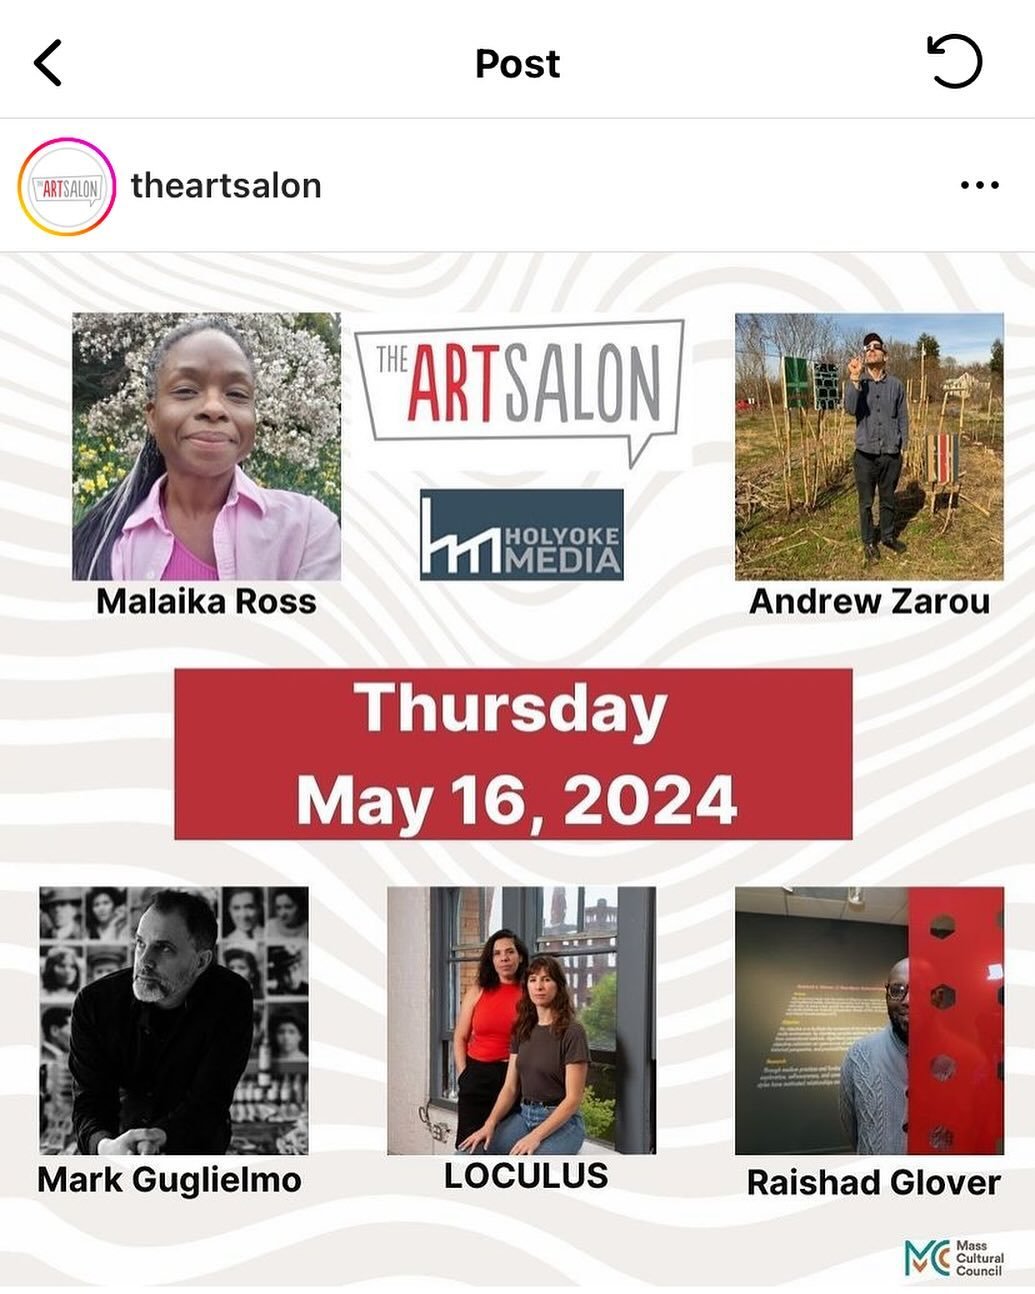 Thank you 🙏🏾 for inviting me to speak and share my work with such great company @theartsalon